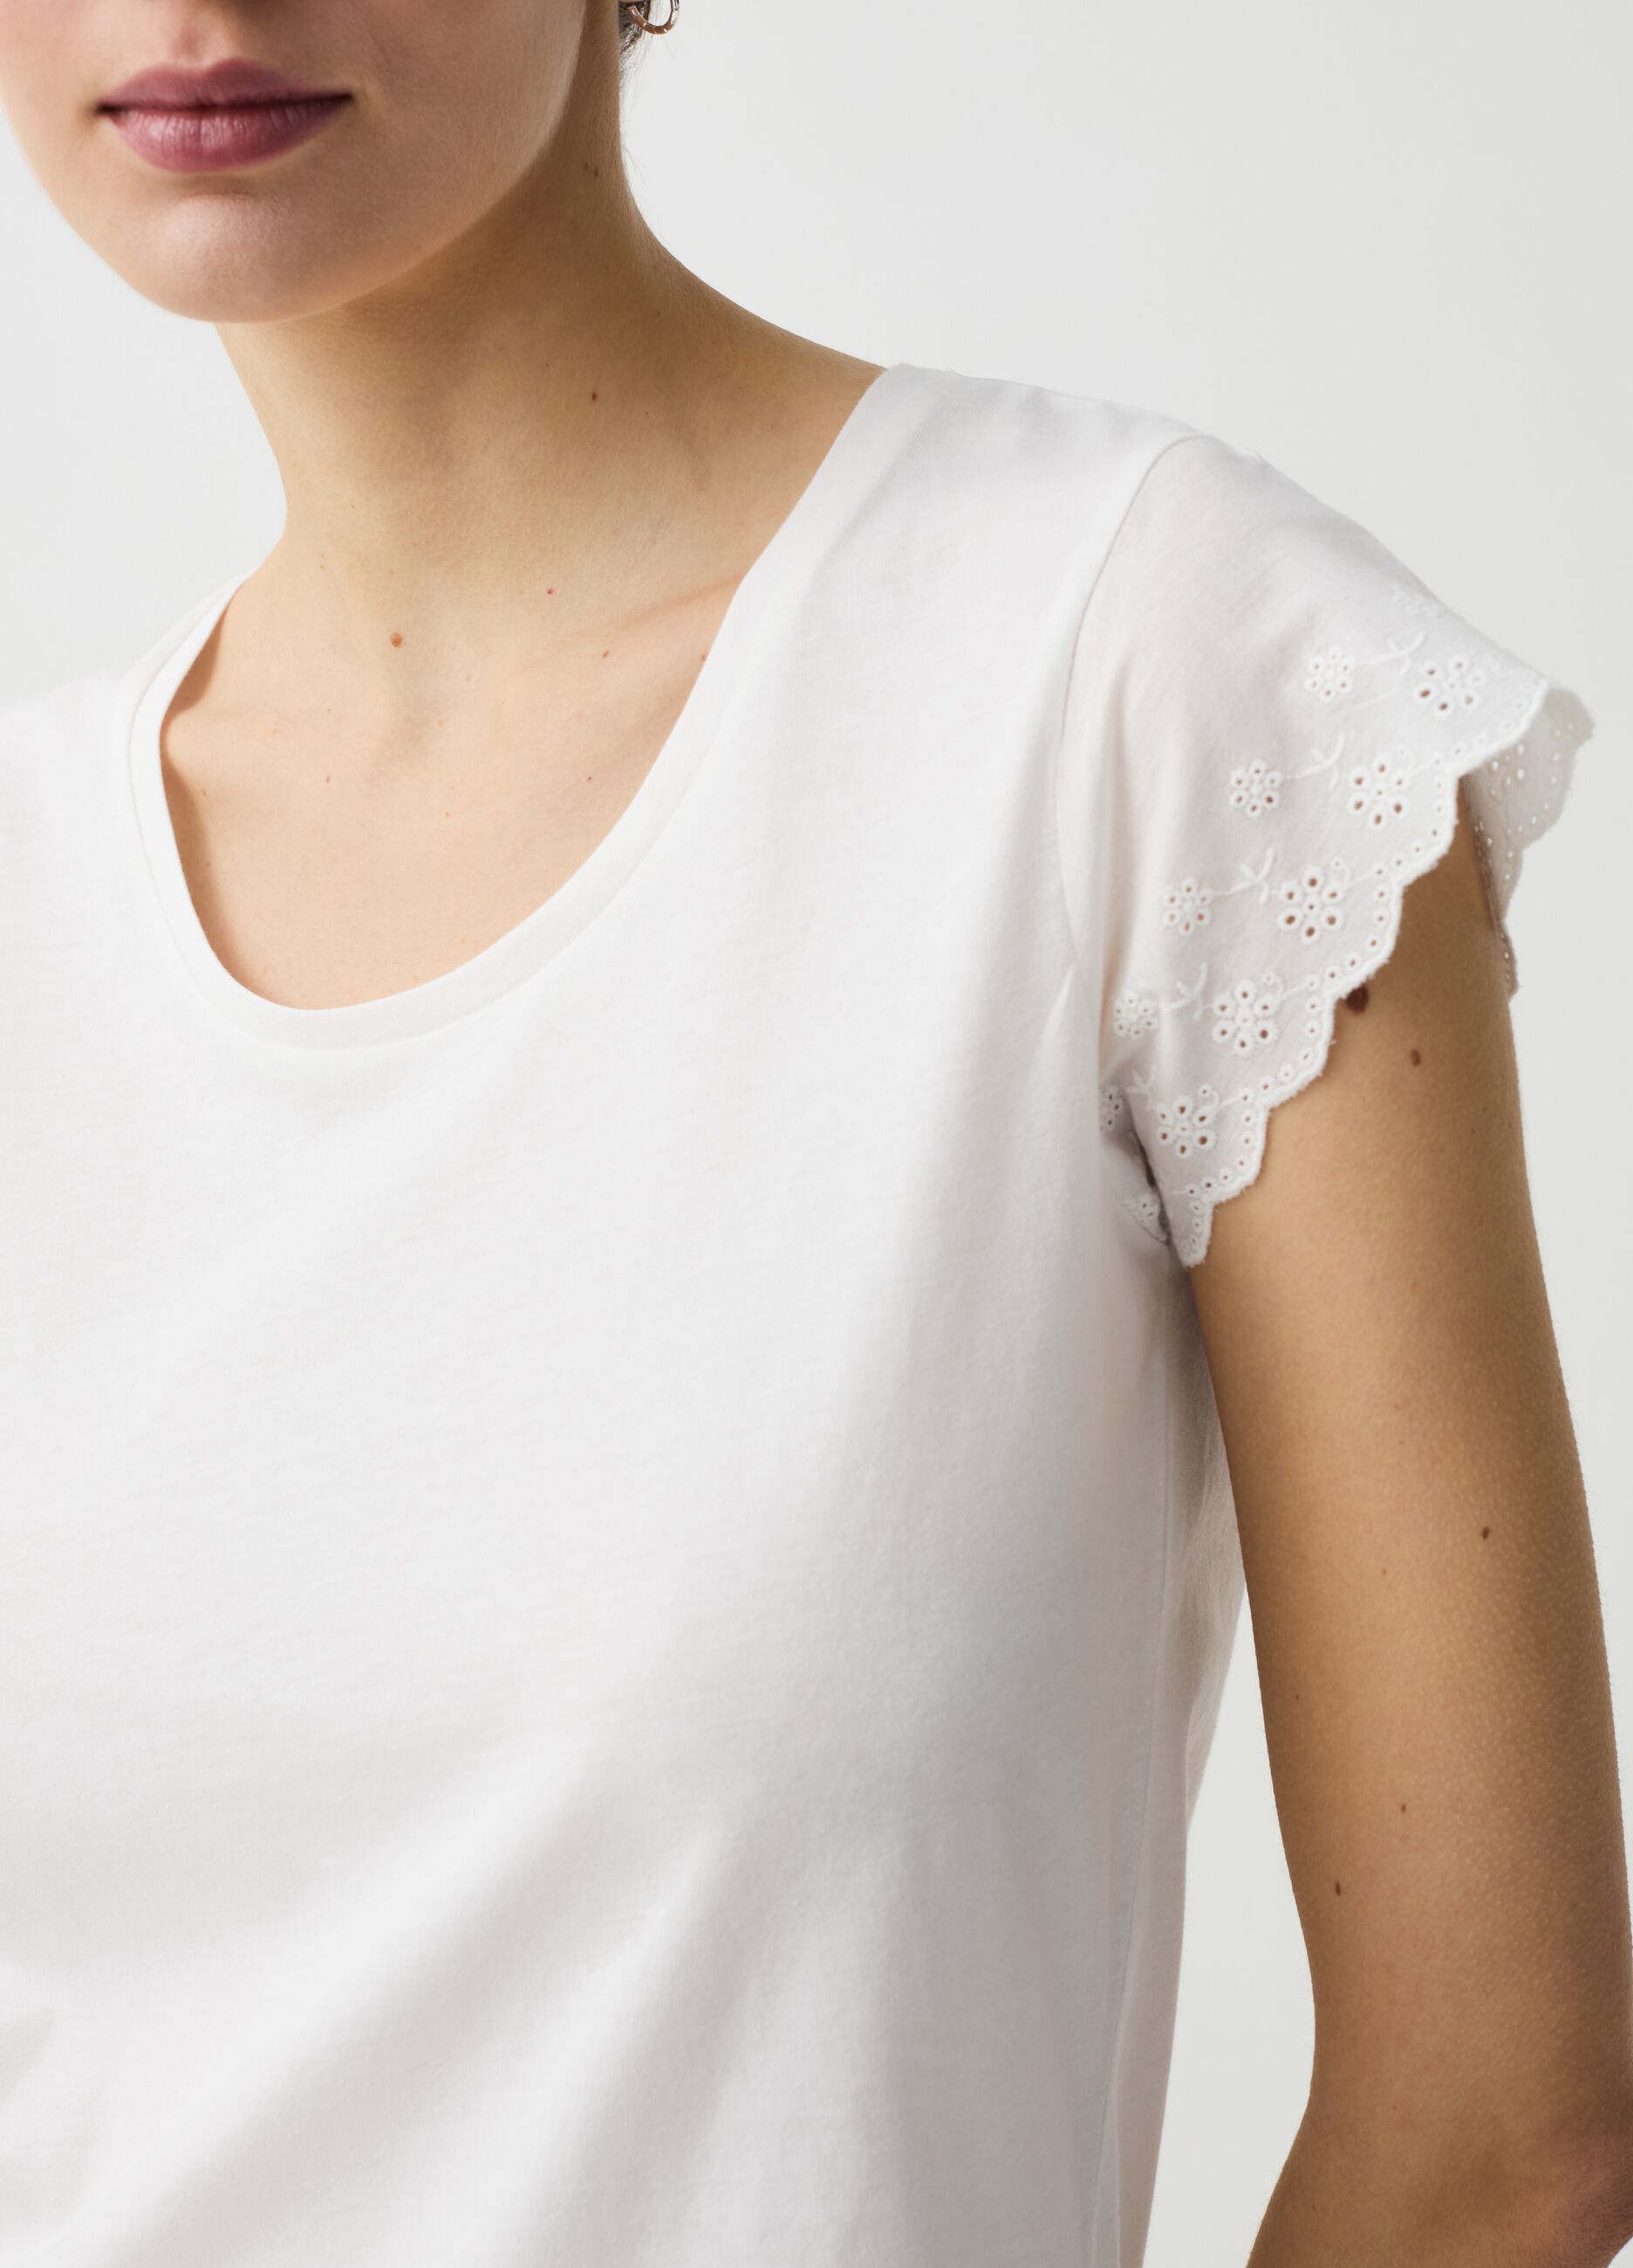 Jersey pyjama top with broderie anglaise edging